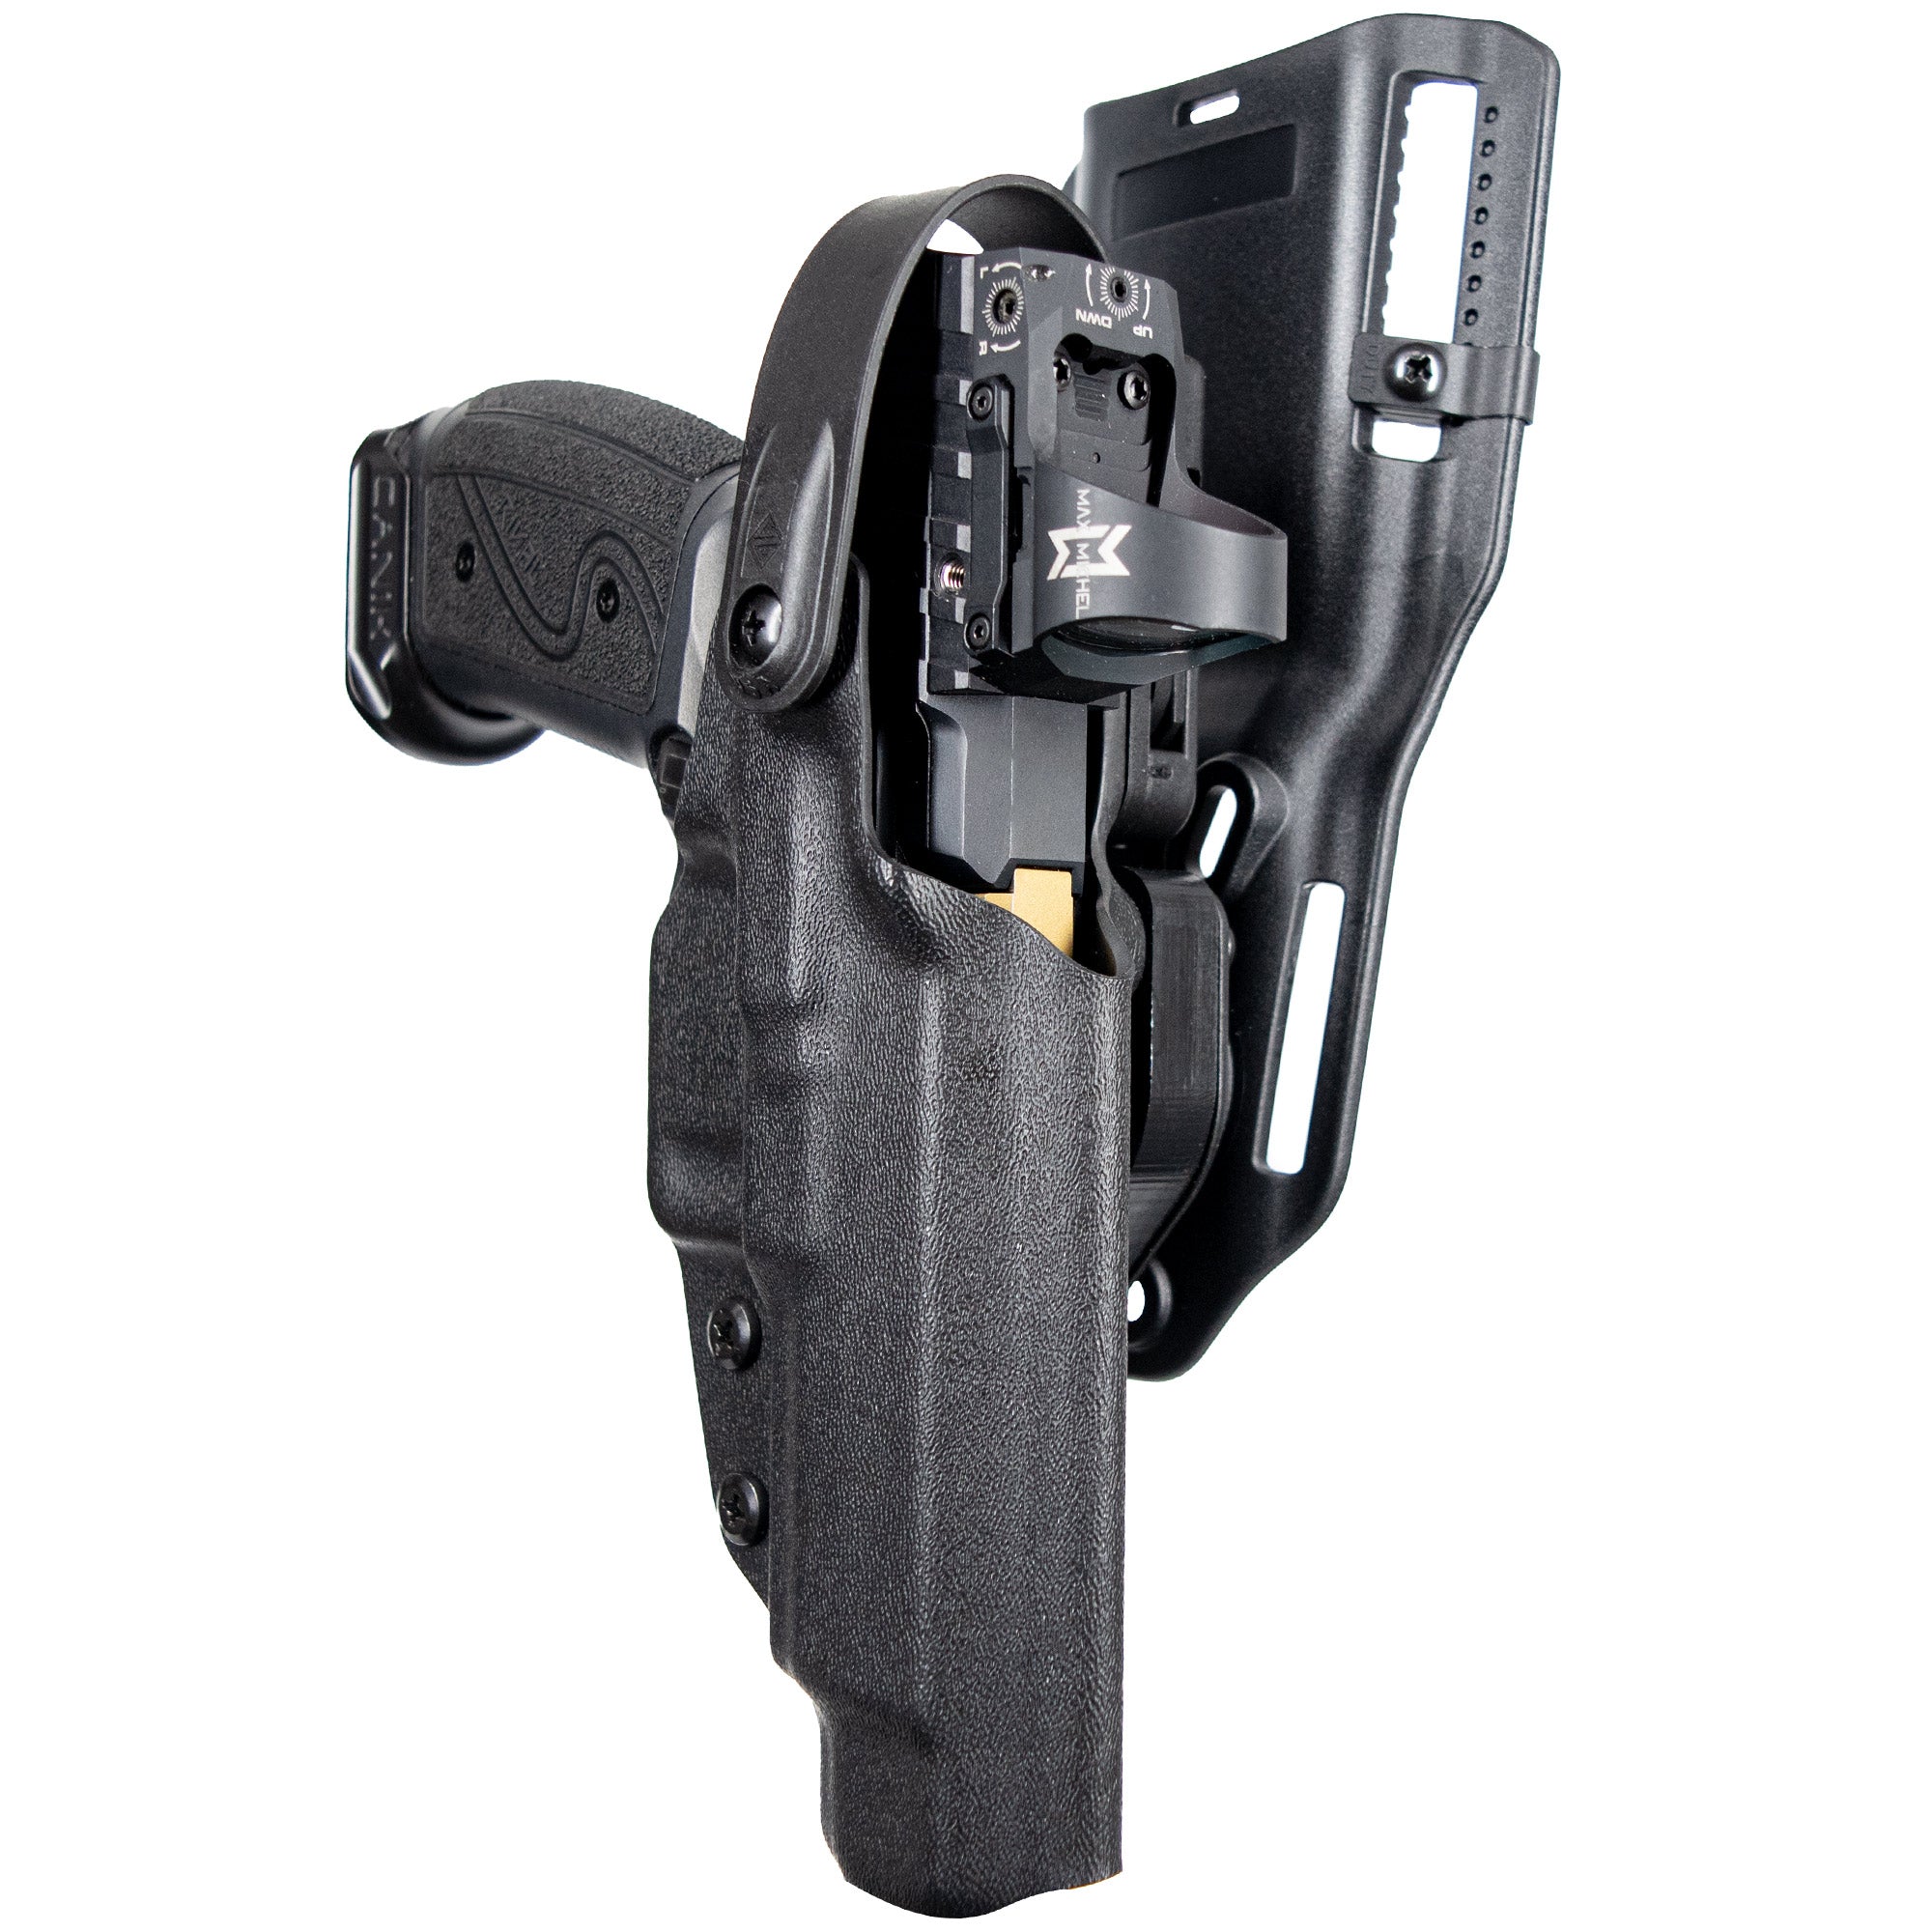 Level II Duty Drop and Offset Holster by Black Scorpion Gear